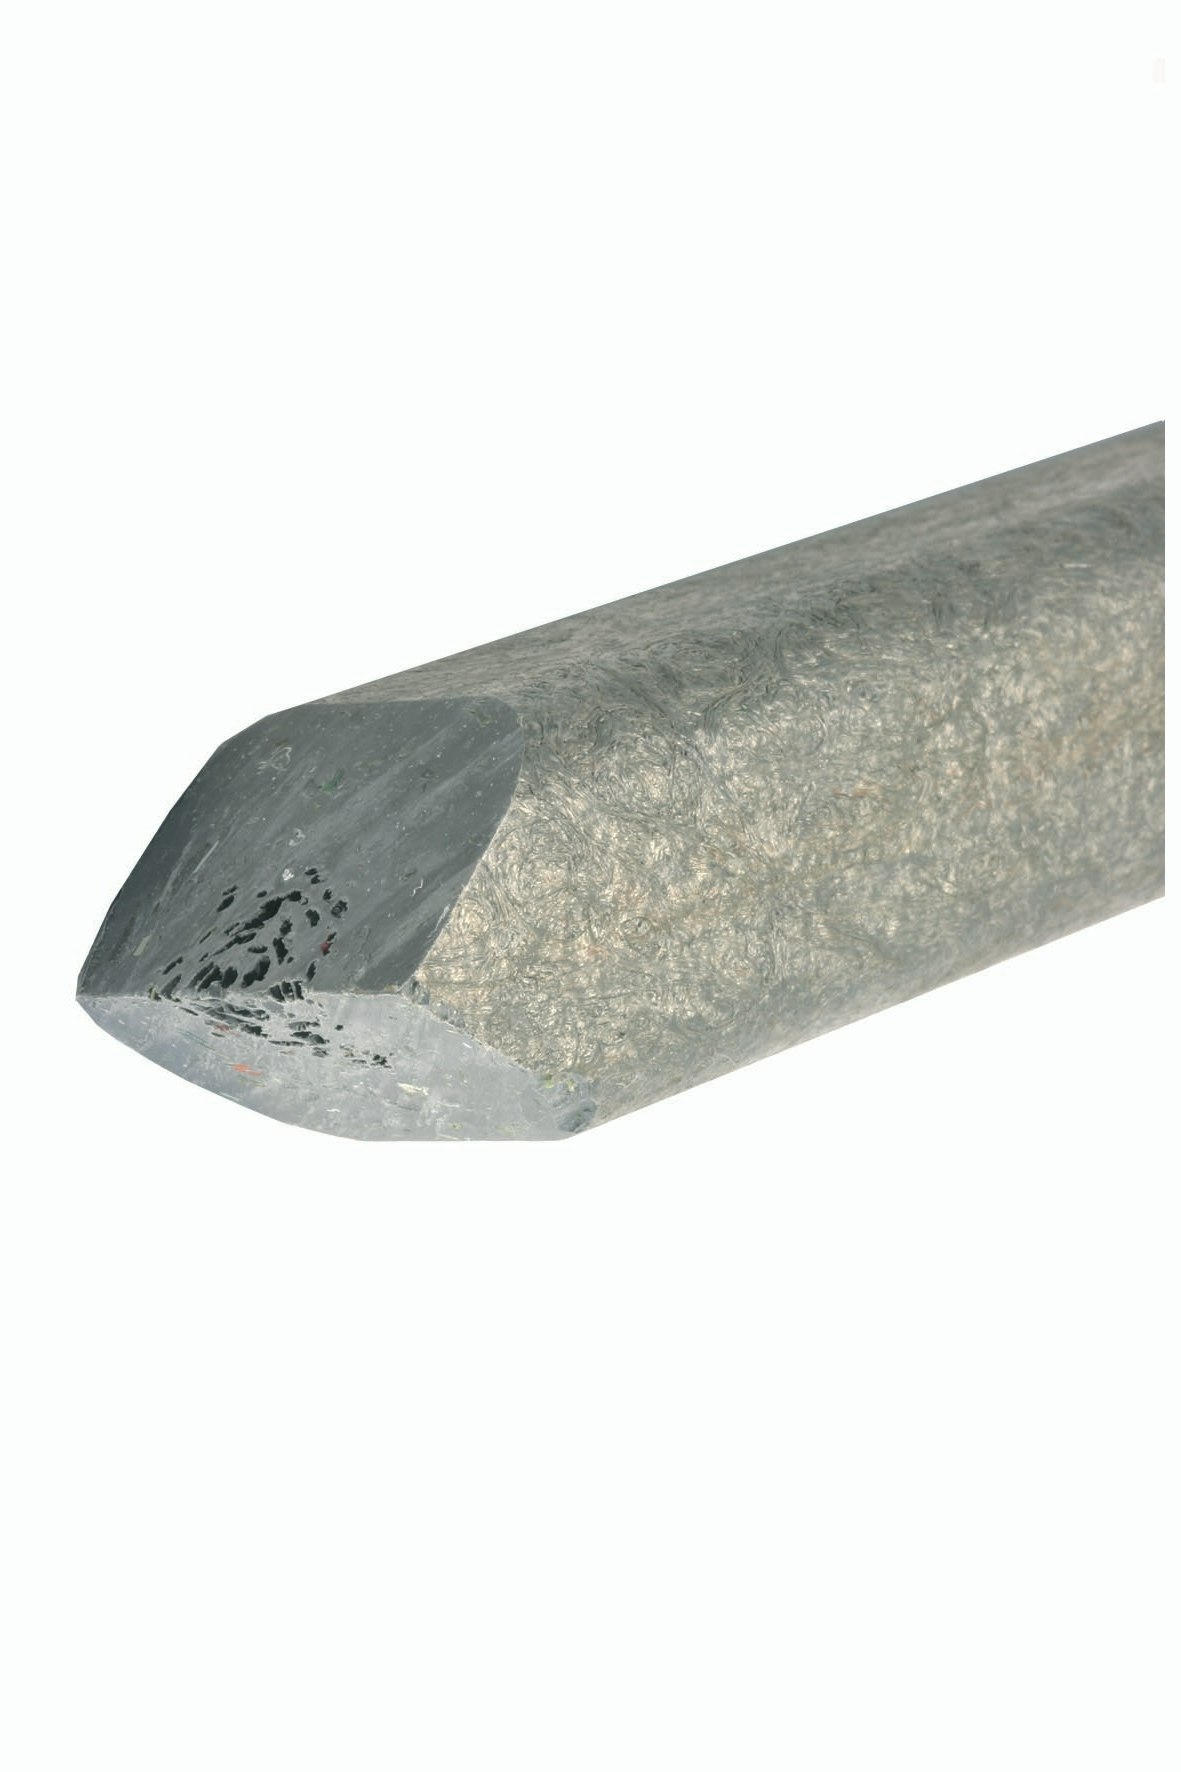 ECO-oh Ecopic® Pfahl Vollmaterial 75 x 4 x 4 cm 10er-Pack